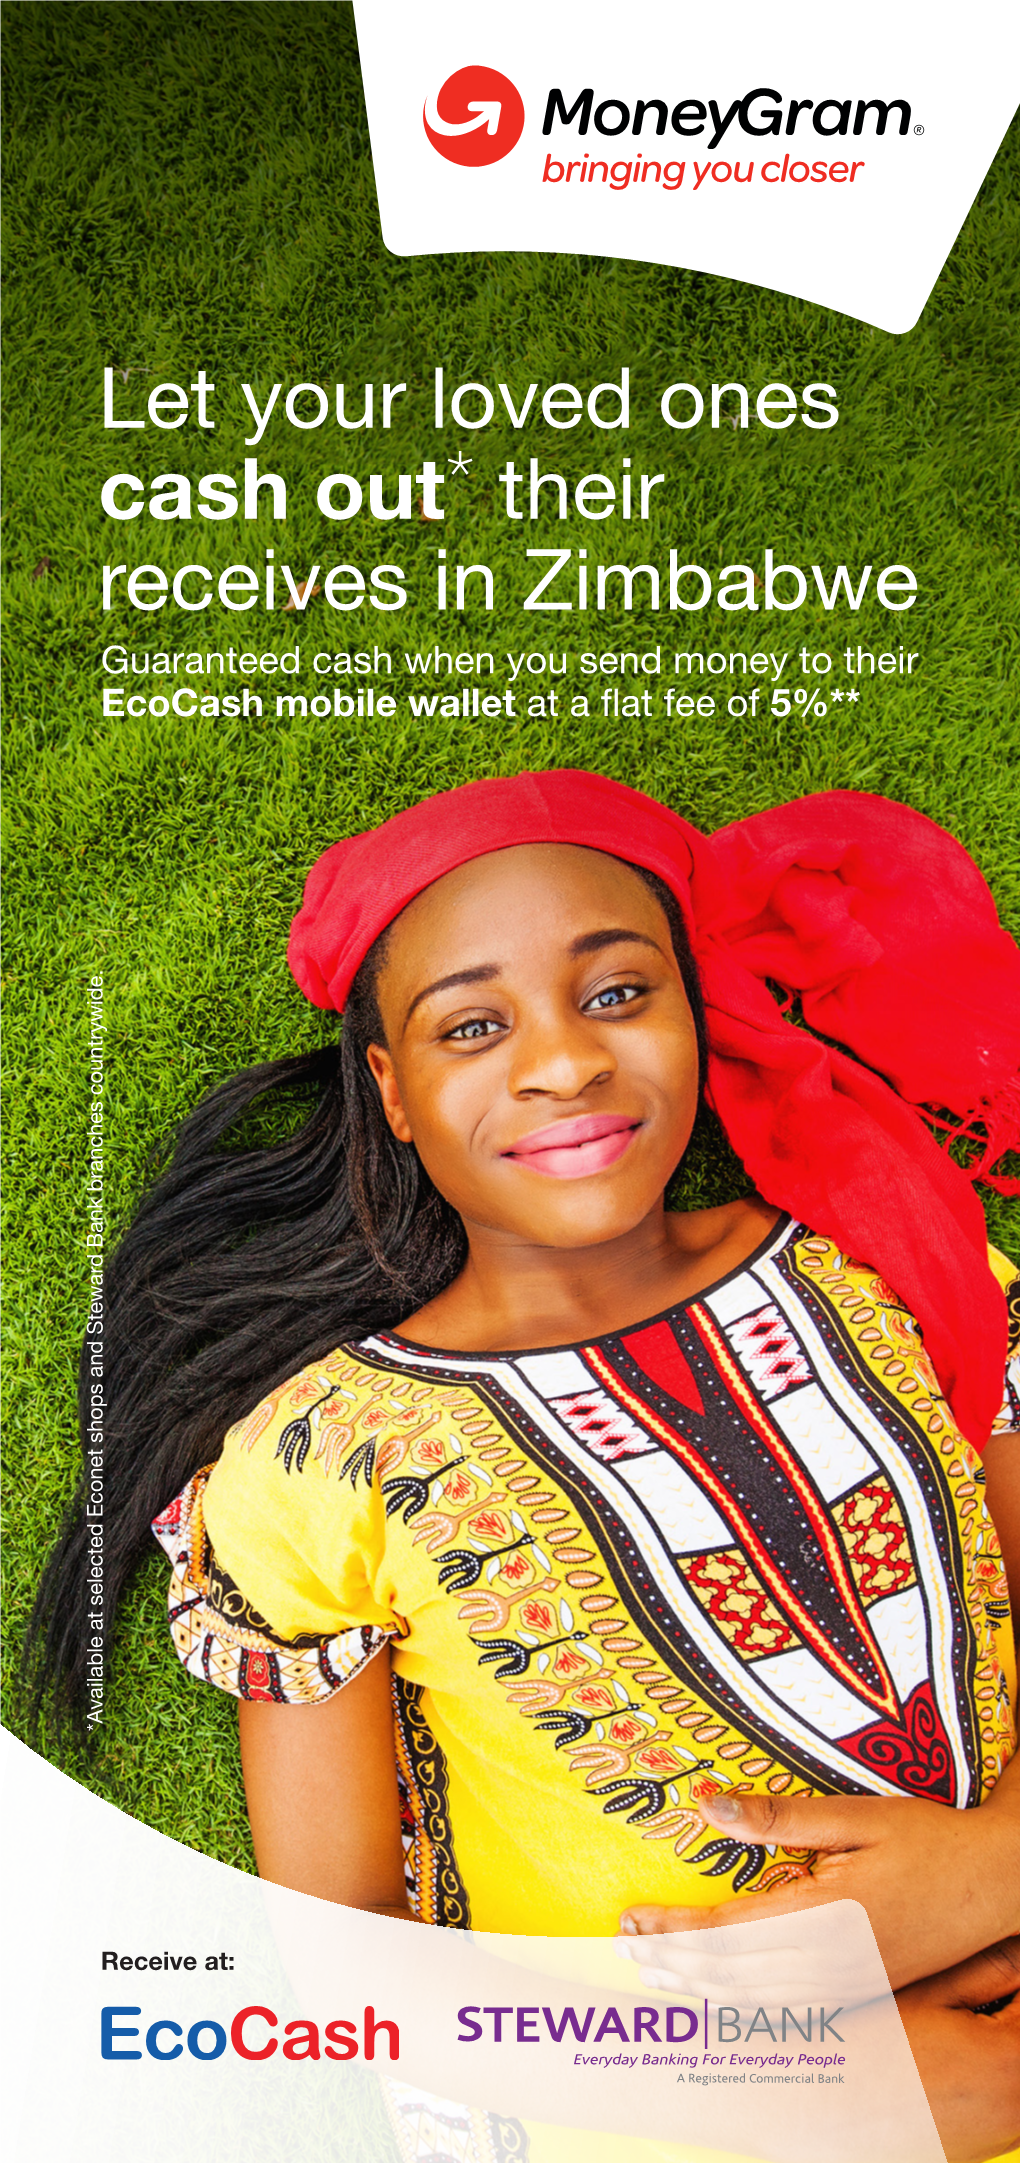 Let Your Loved Ones Cash Out* Their Receives in Zimbabwe